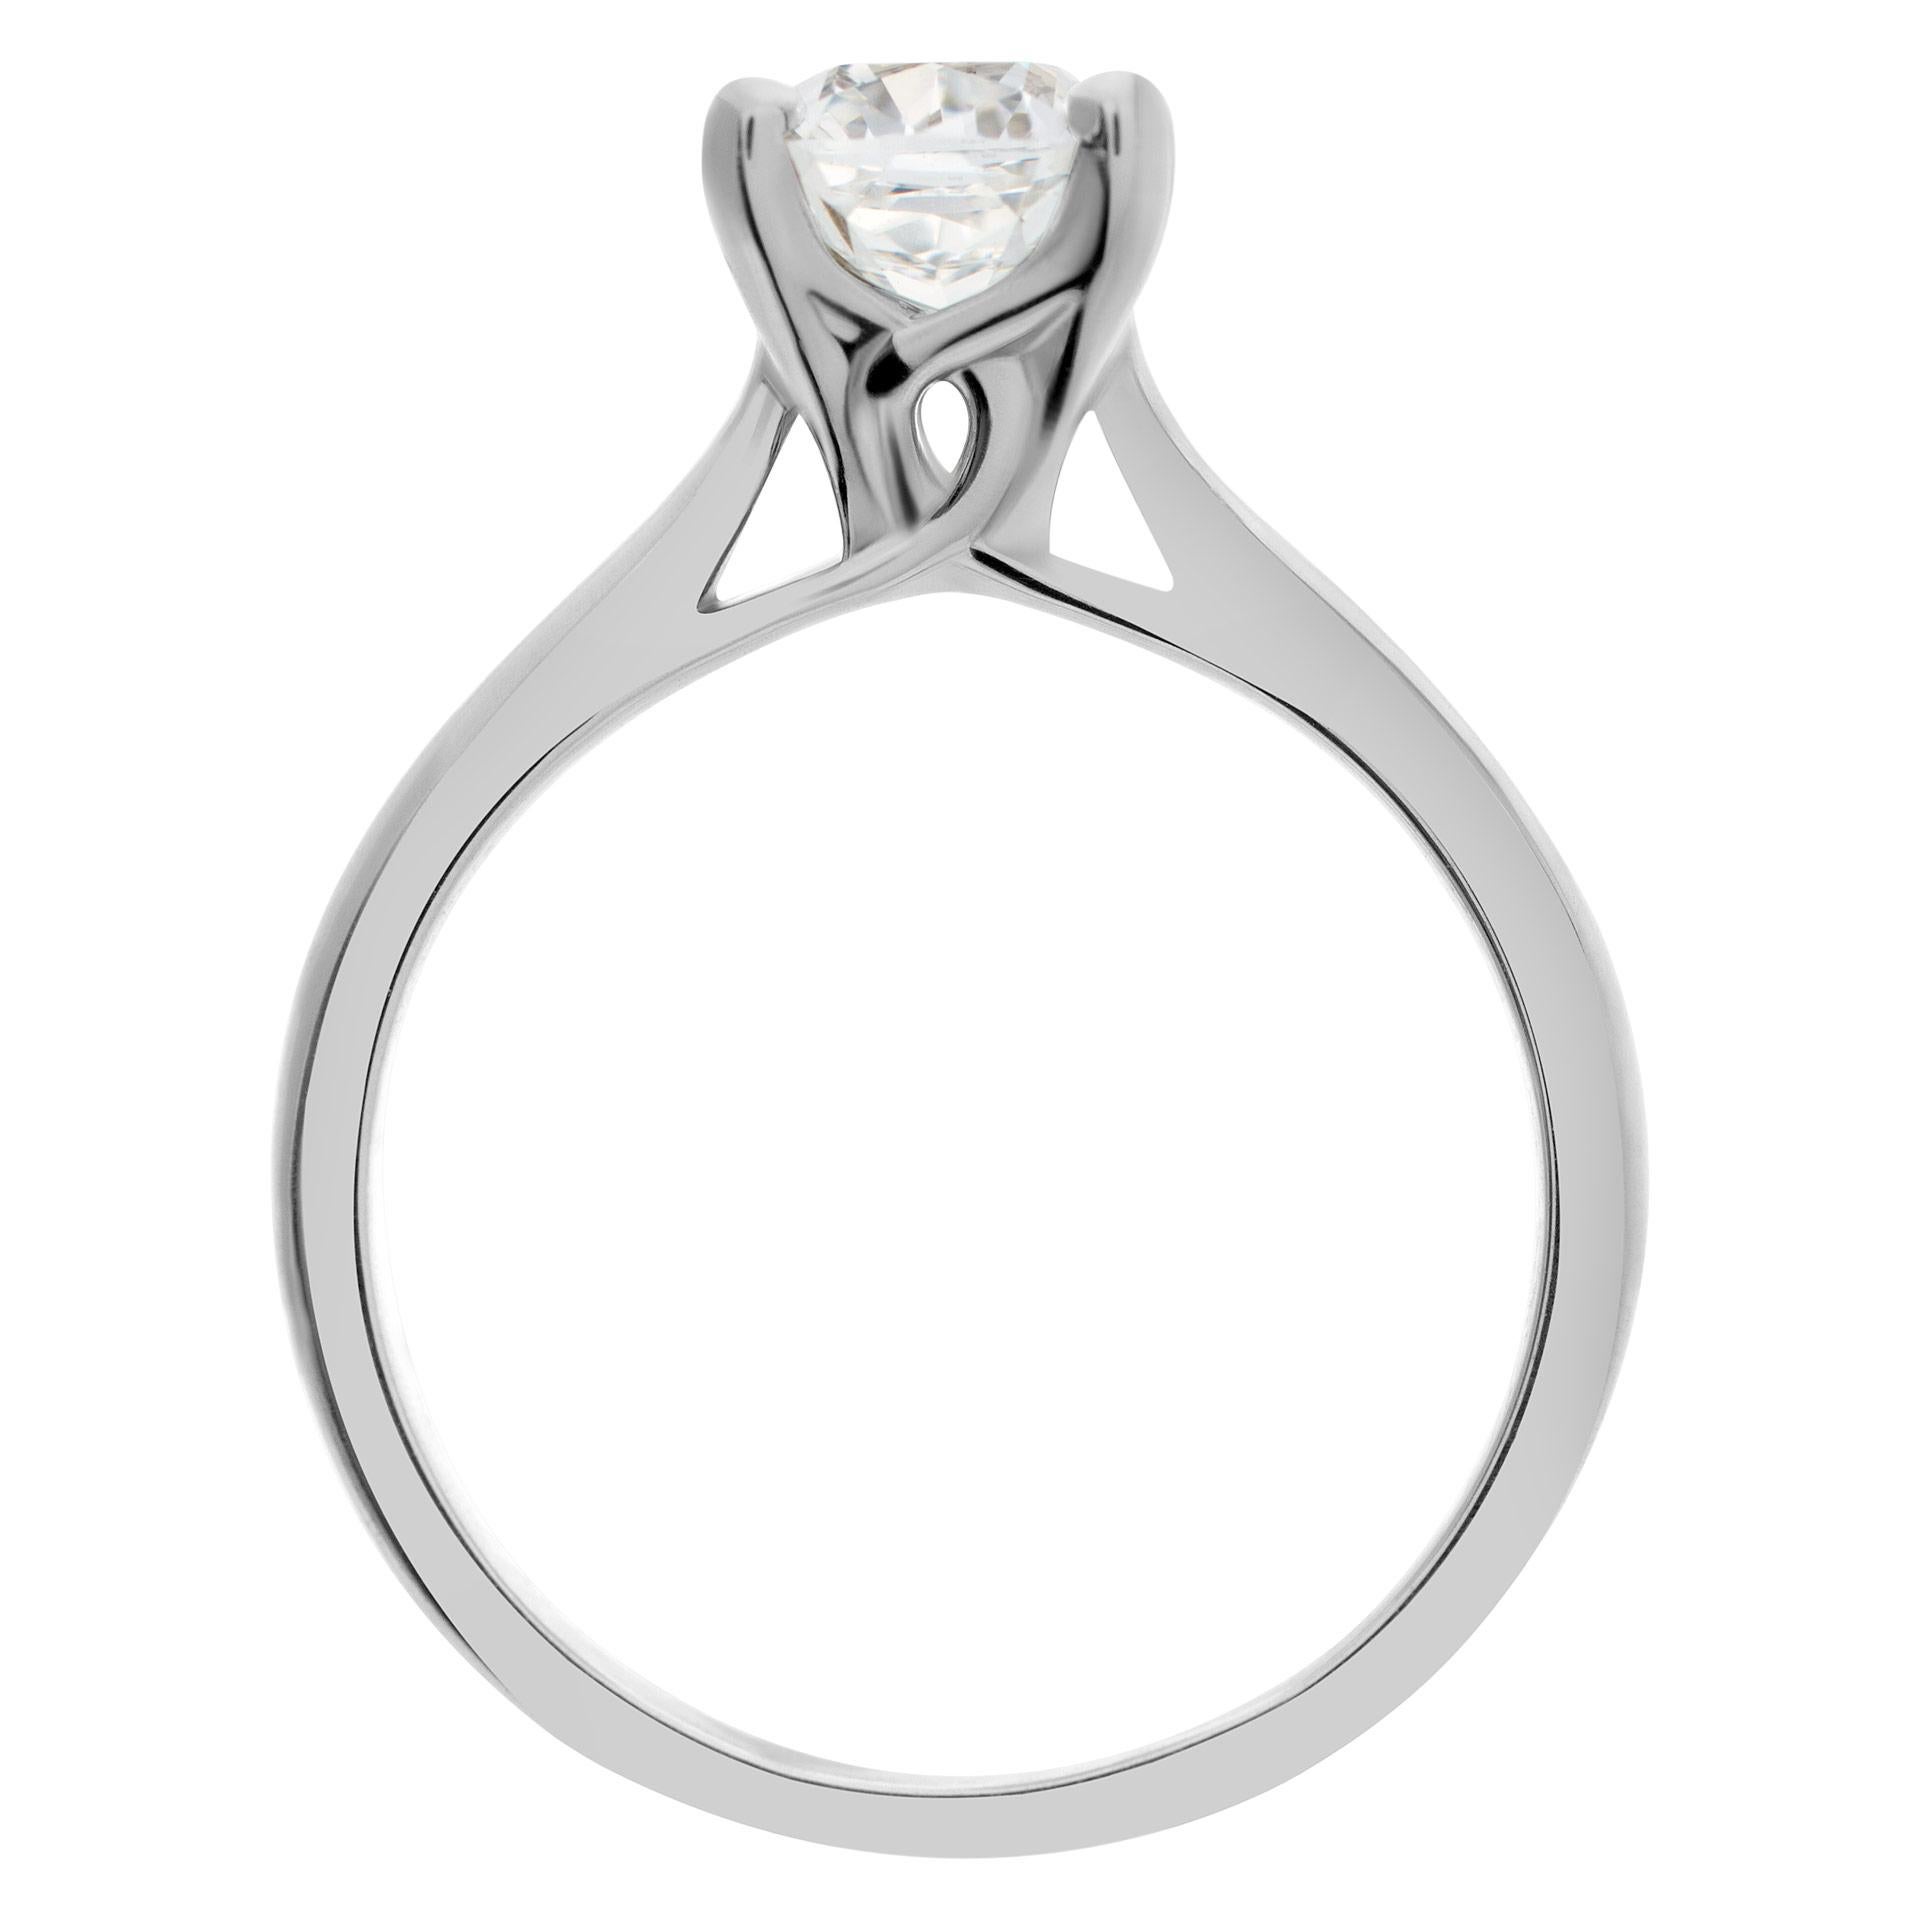 GIA report certified cushion brilliant cut diamond 1.55 carat (H color, VS2 clarity) ring set in an 18k white gold simple solitare. Size 7 This GIA report certified ring is currently size 7 and some items can be sized up or down, please ask! It